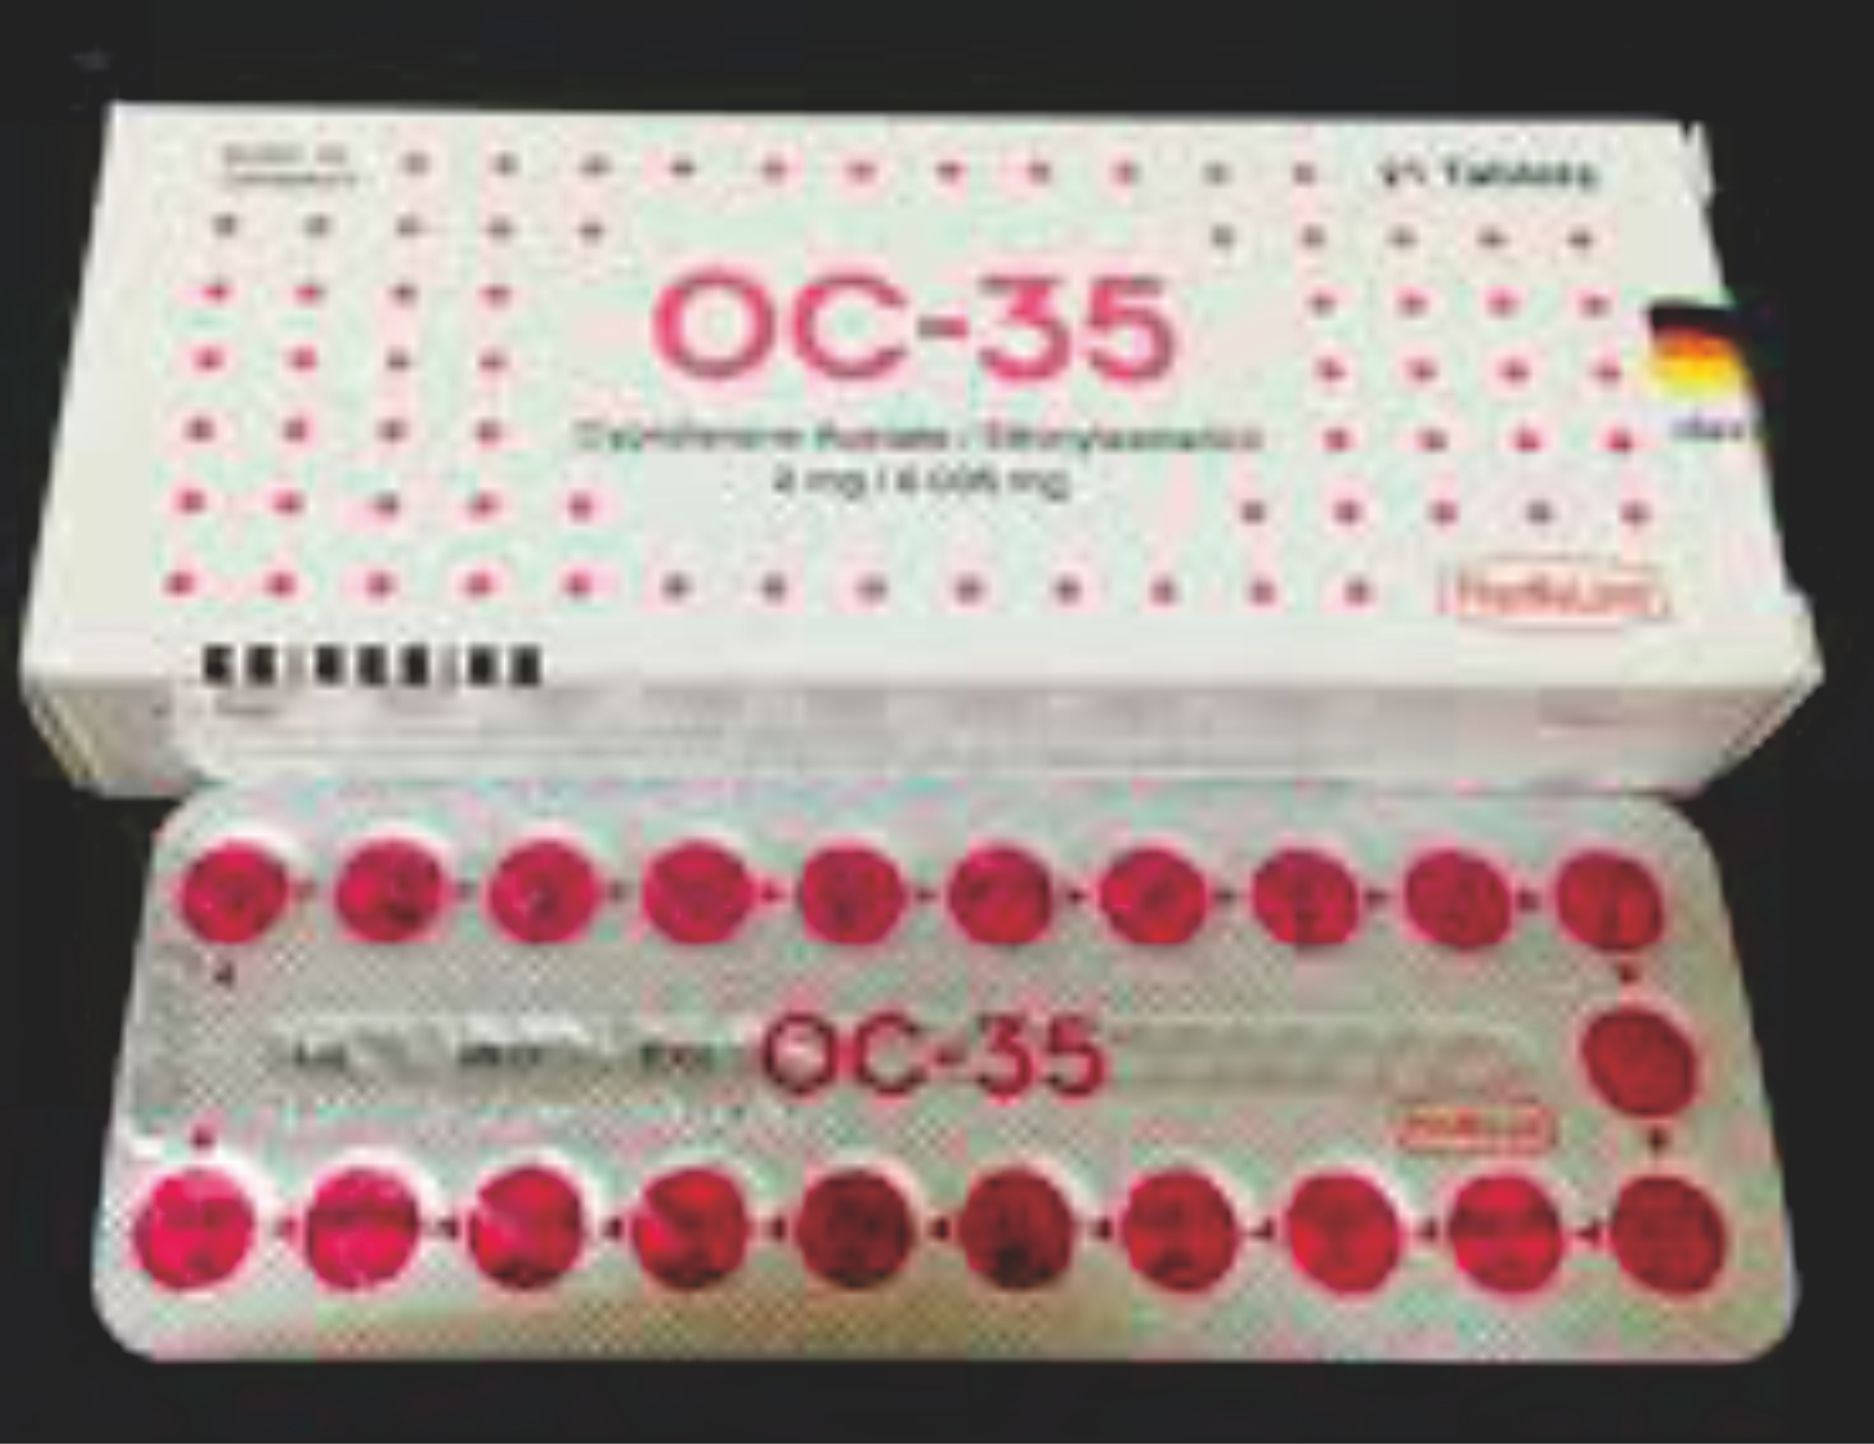 OC 35 Cyproterone acetate, Ethinylestradiol 21 tablets (Buy 6 boxes get 1 box free)